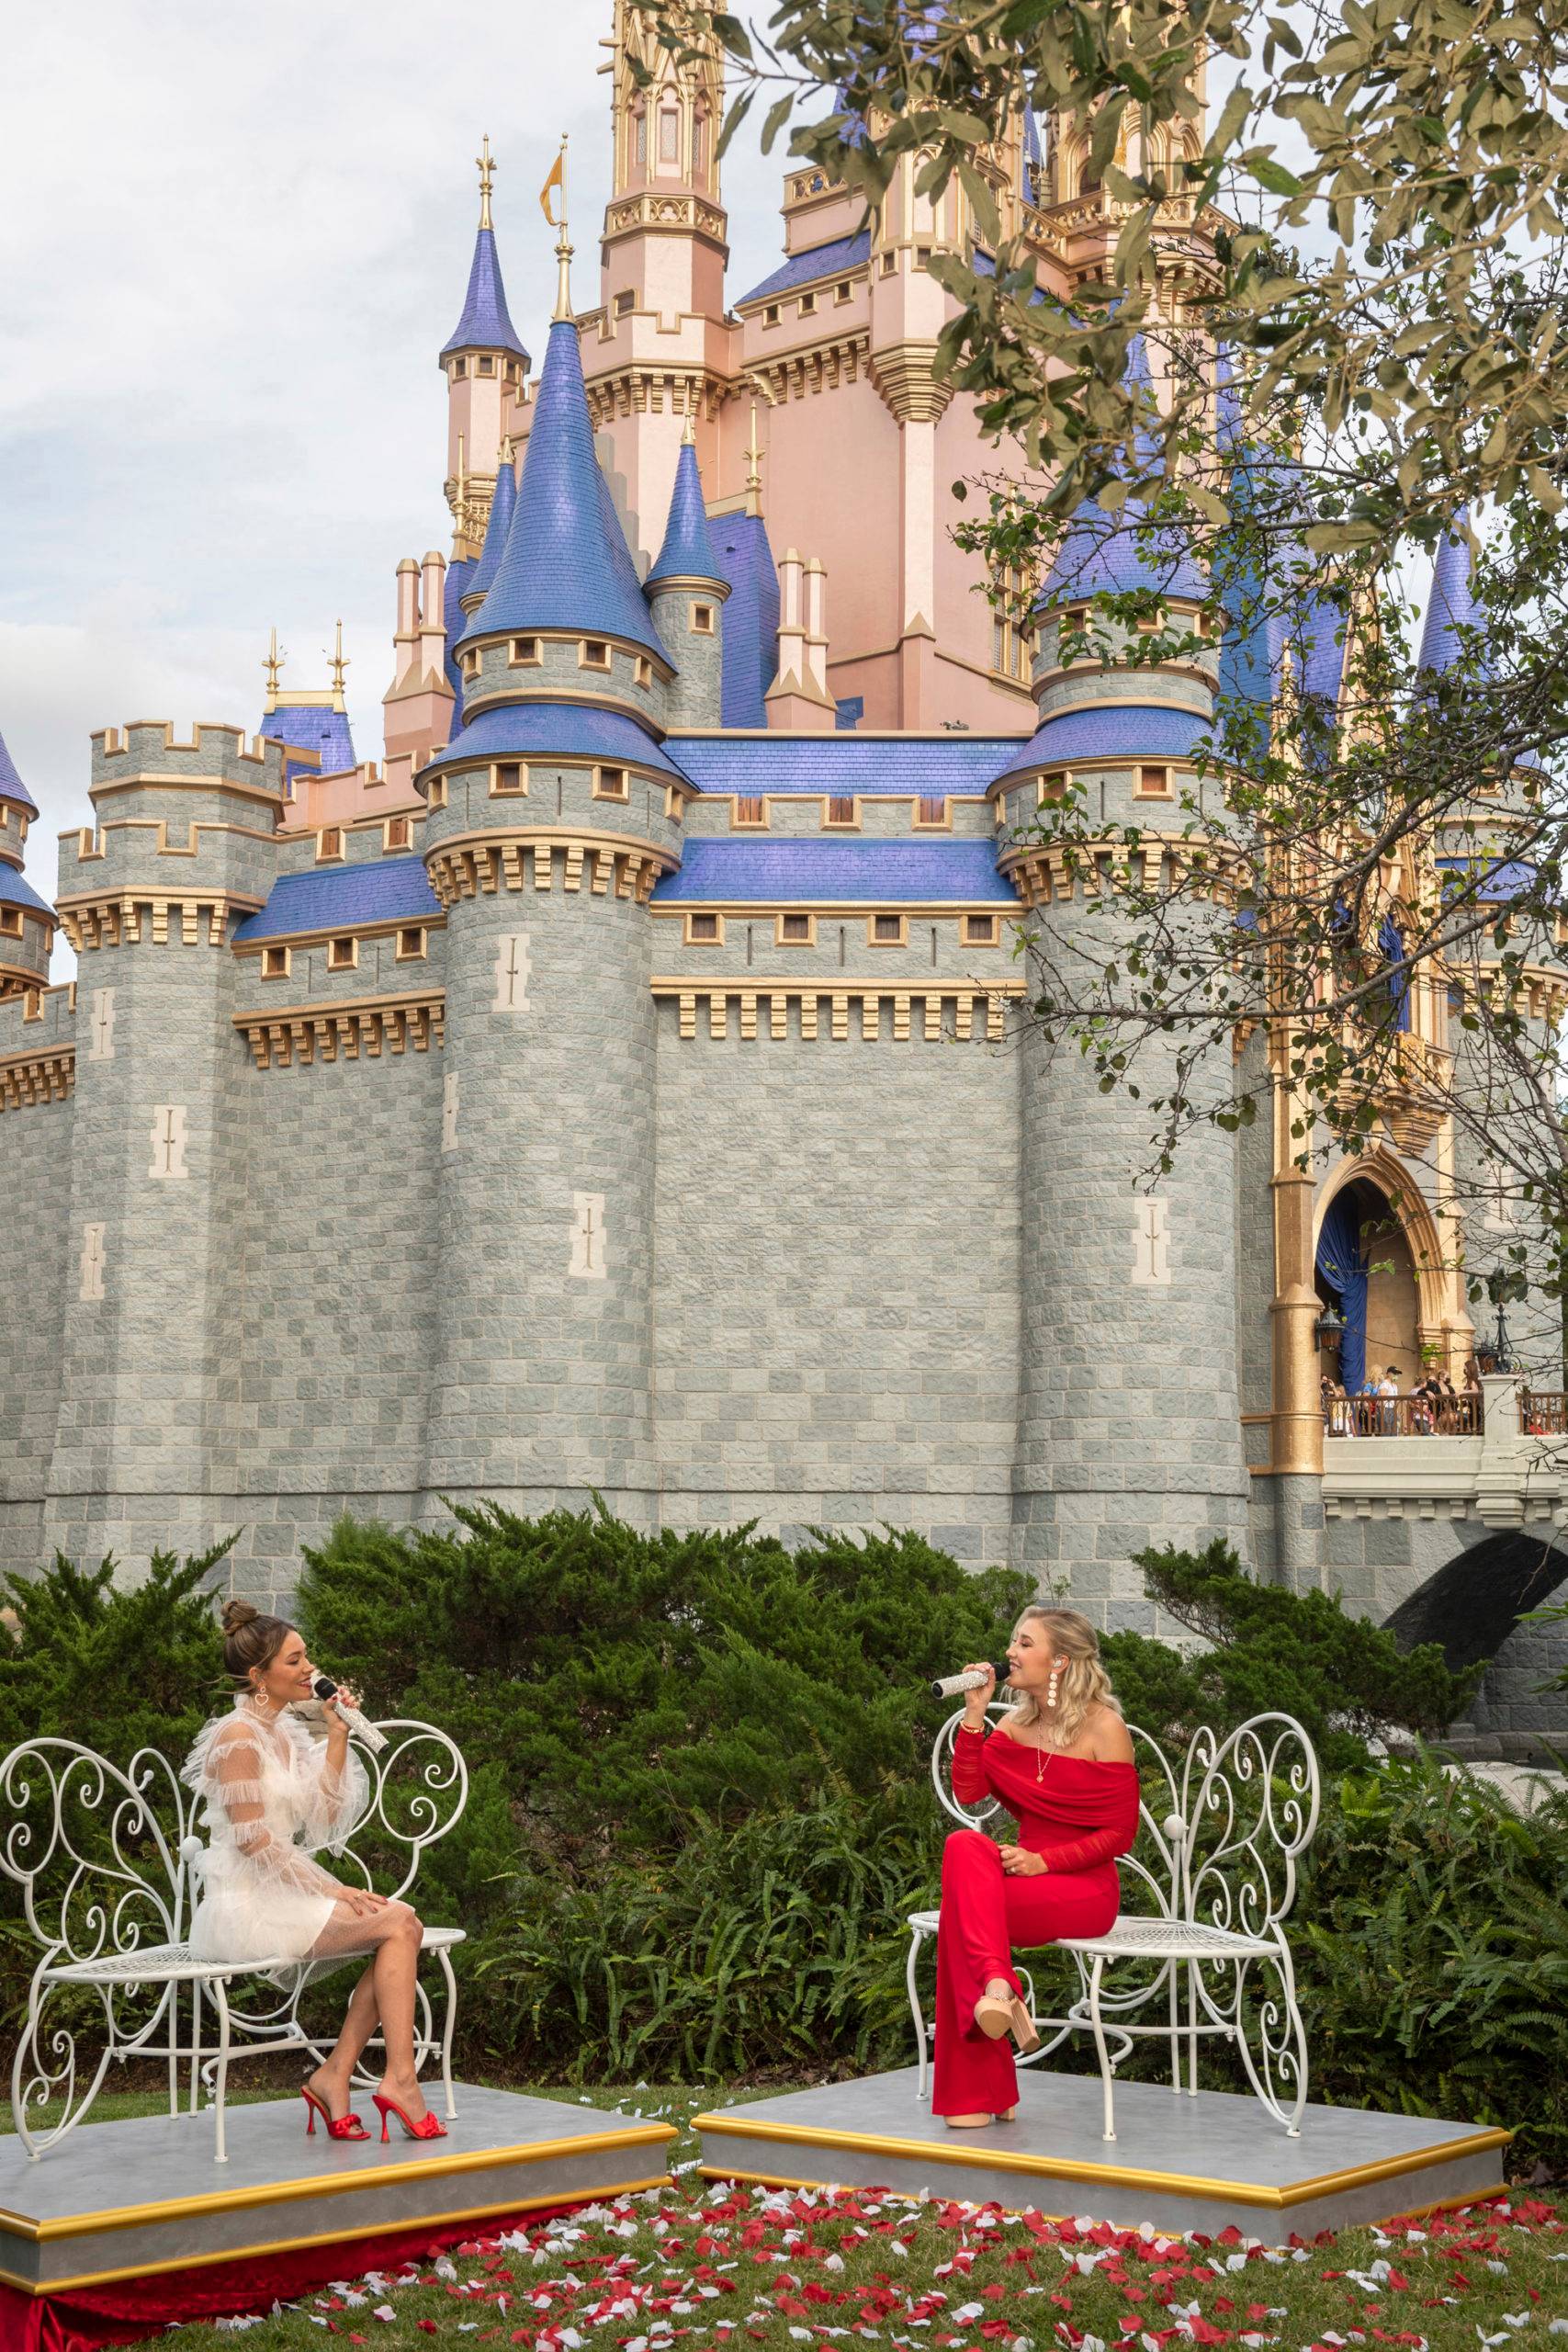 Country duo Maddie & Tae perform in front of Cinderella Castle at Magic Kingdom